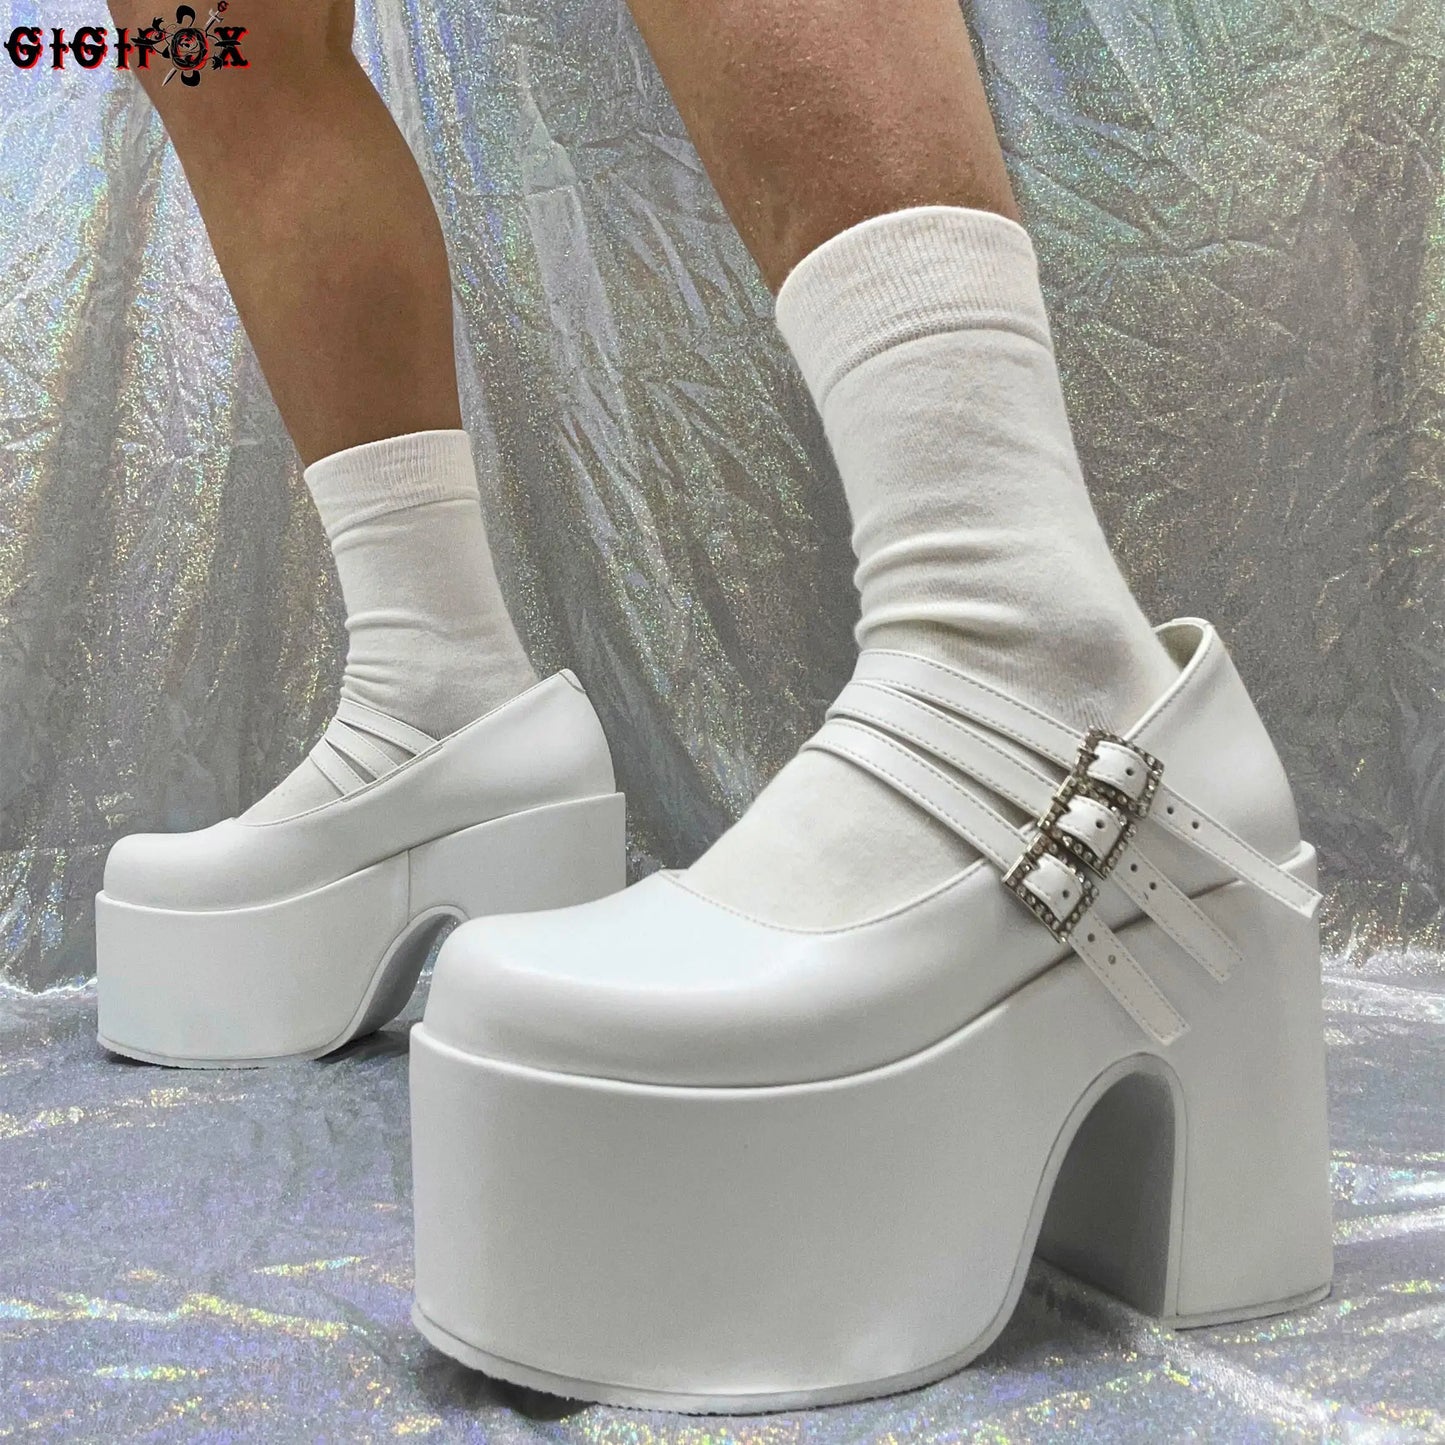 Brand Luxury Platform High Heels Shoes For Women Buckle Chunky Heels Fashion Gothic Casual Cosplay Spring Shoes Ladies